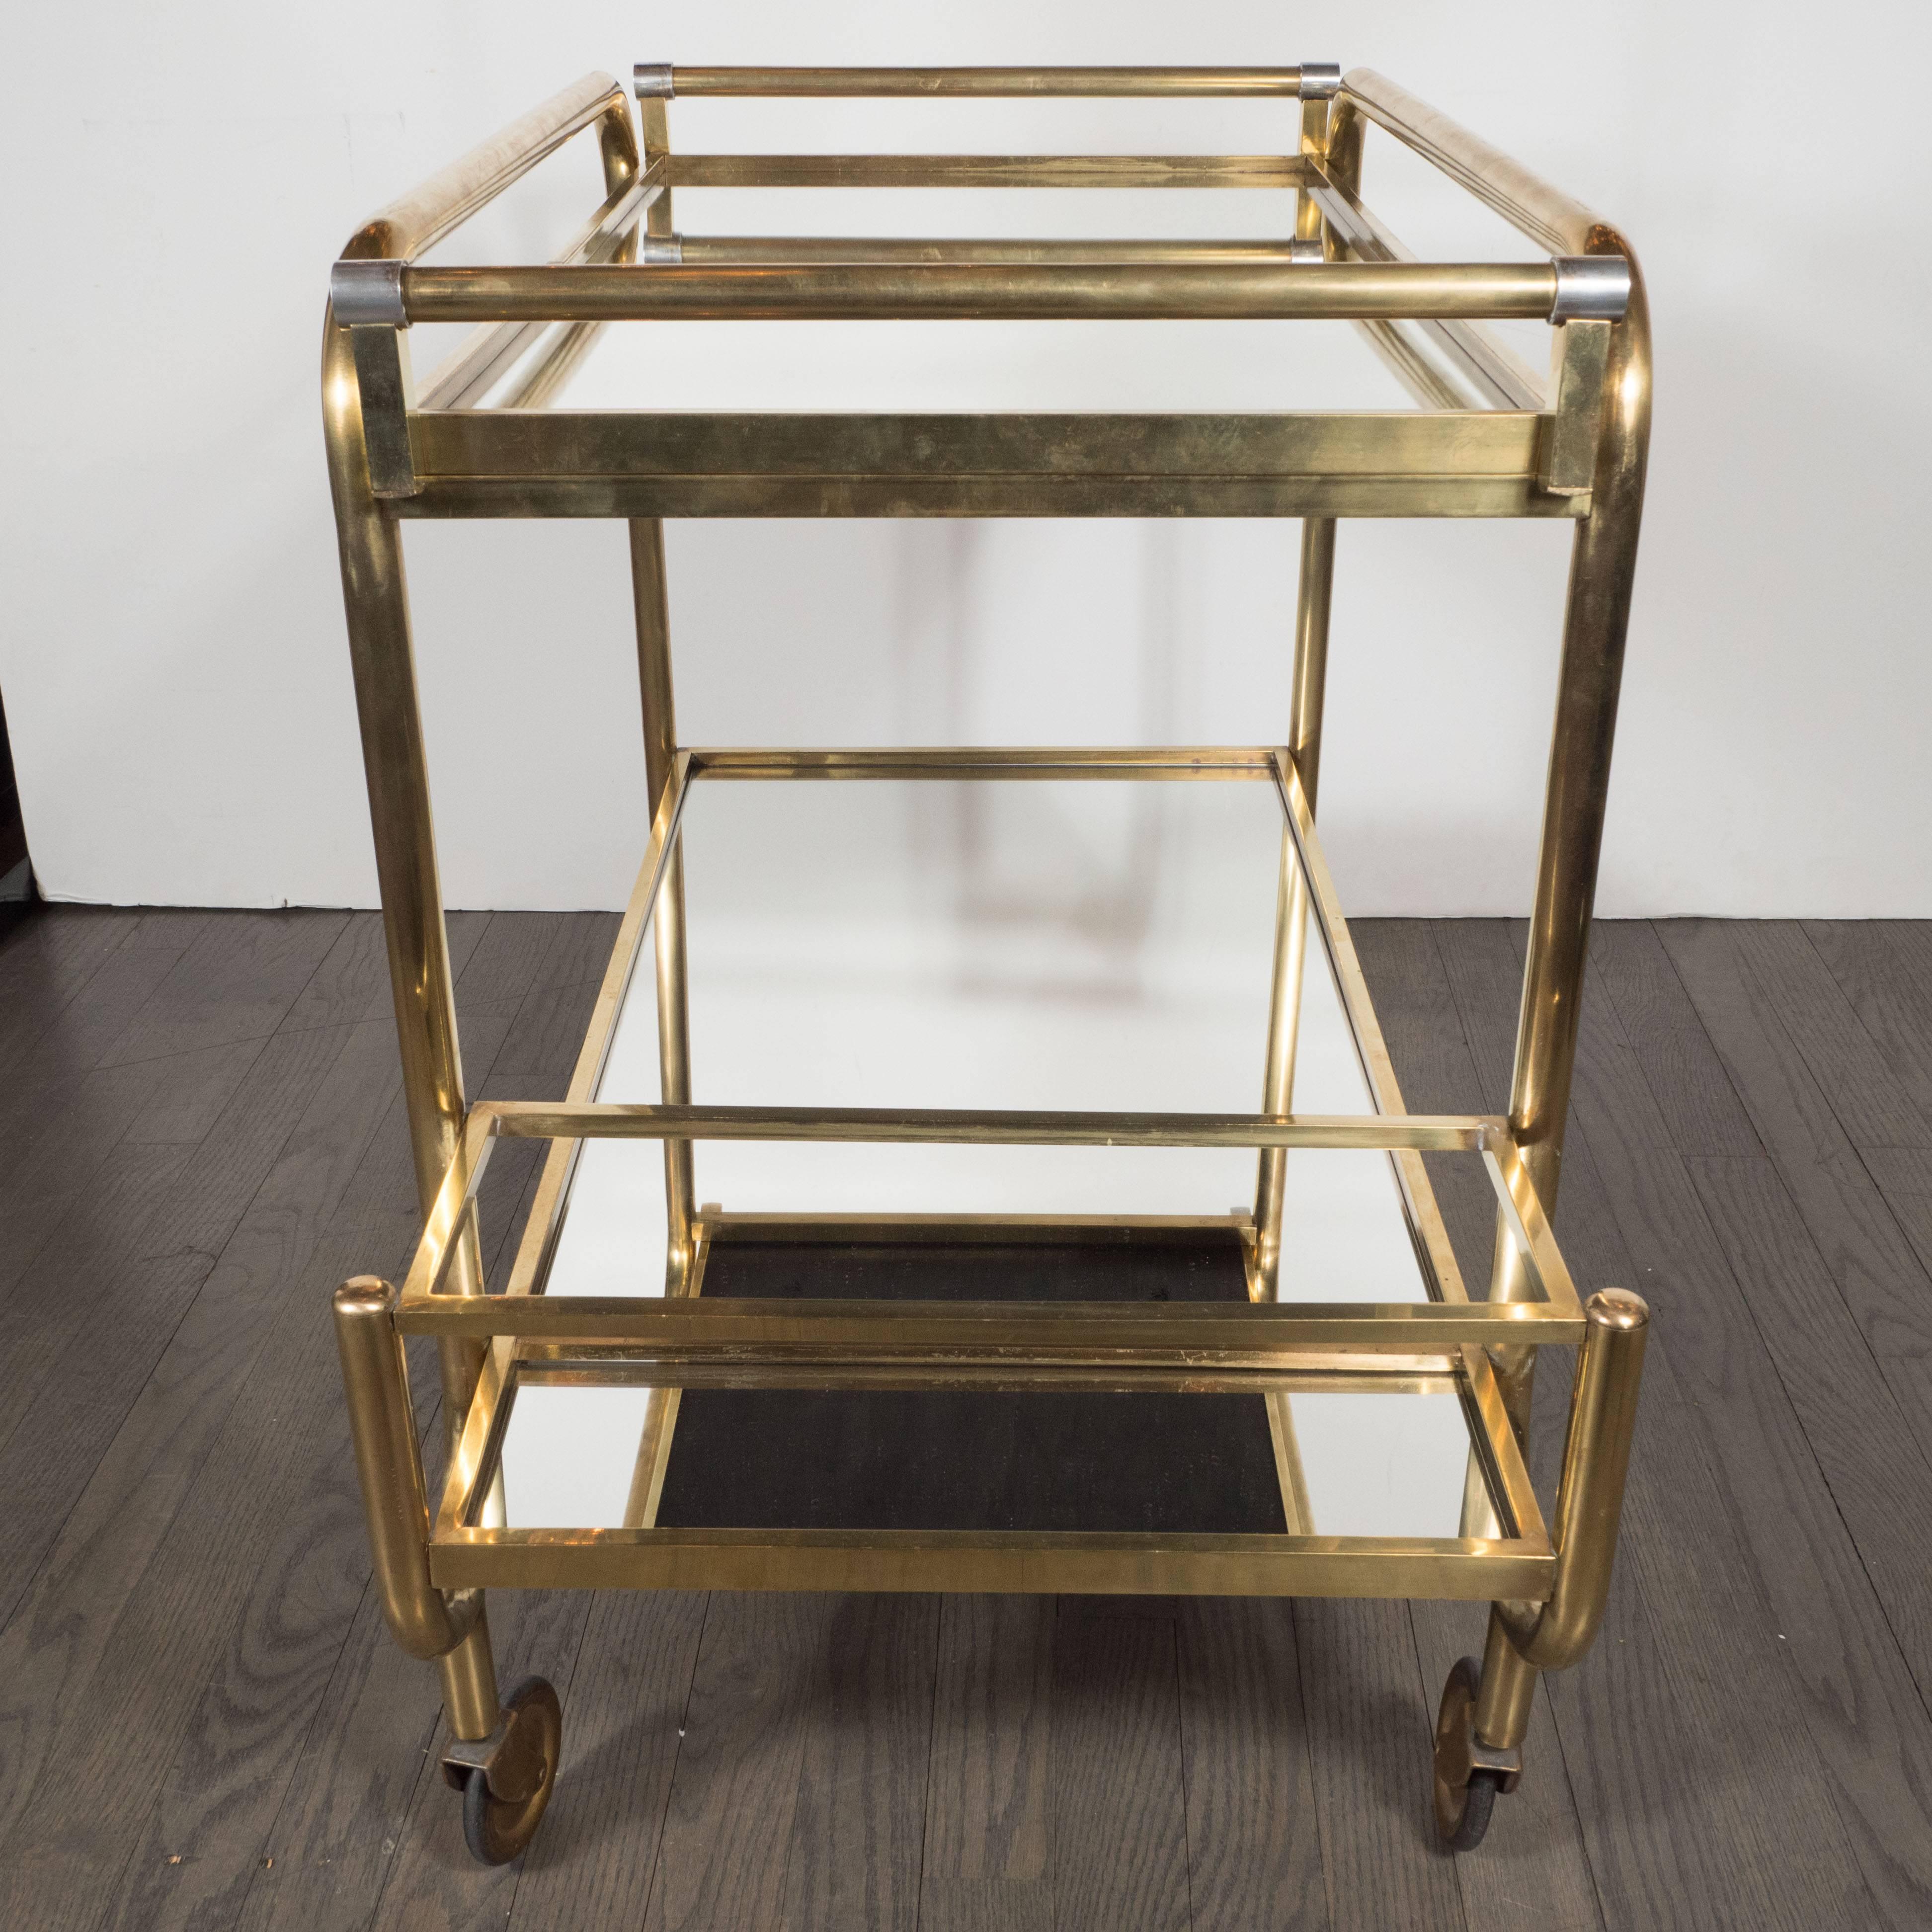 Mid-20th Century Italian Mid-Century Modern Brass and Mirrored Glass Bar Cart with Casters